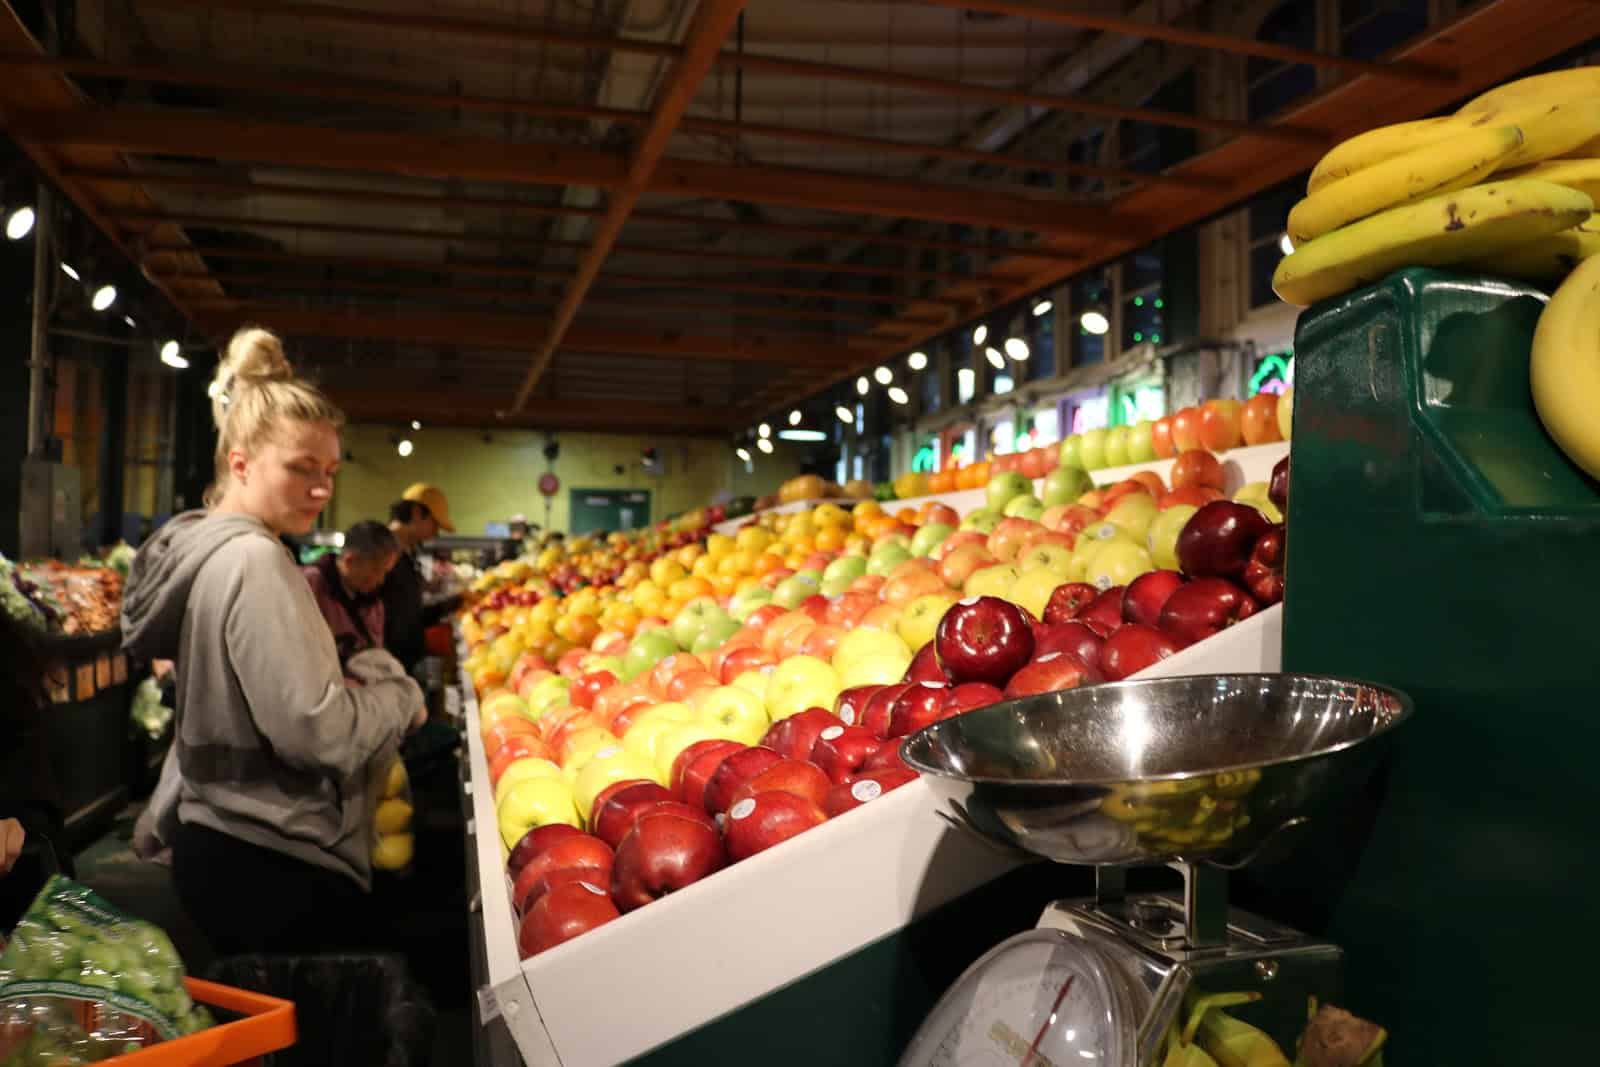 Woman looks at apples at grocery store